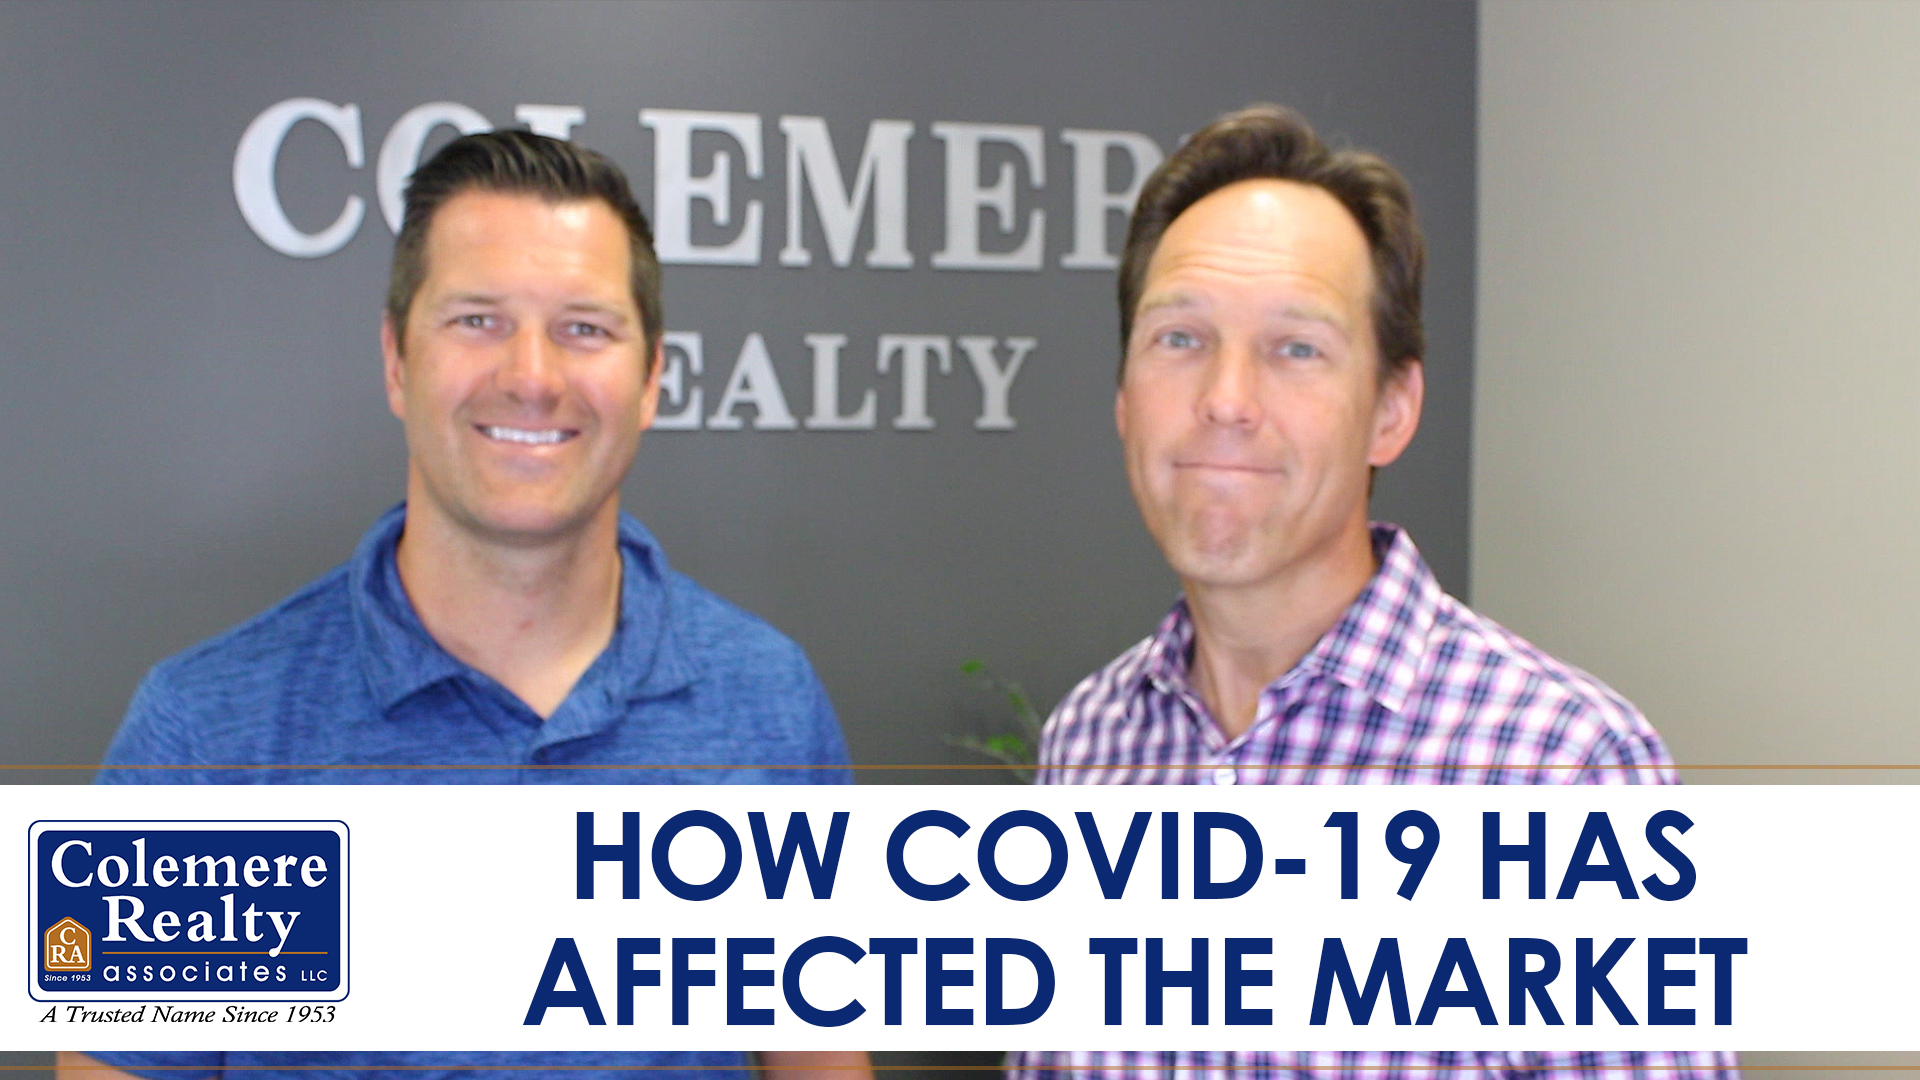 How Has COVID-19 Affected Our Market?